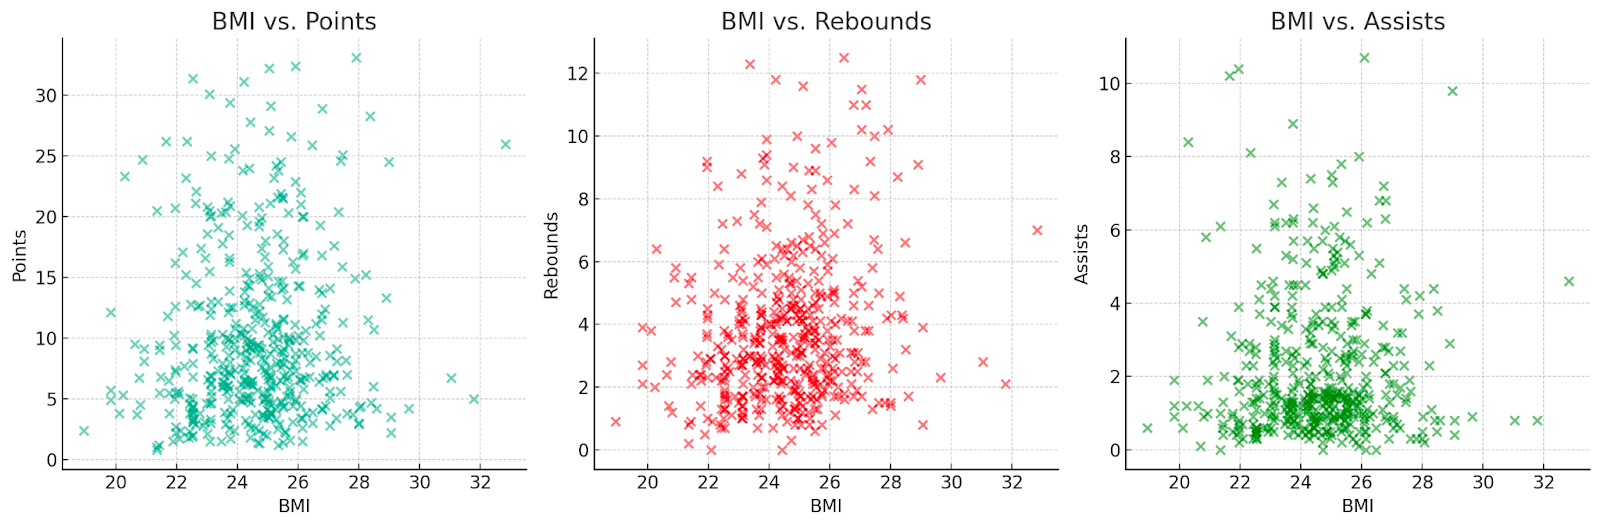 BMI vs Points, Rebounds and Assists Performance